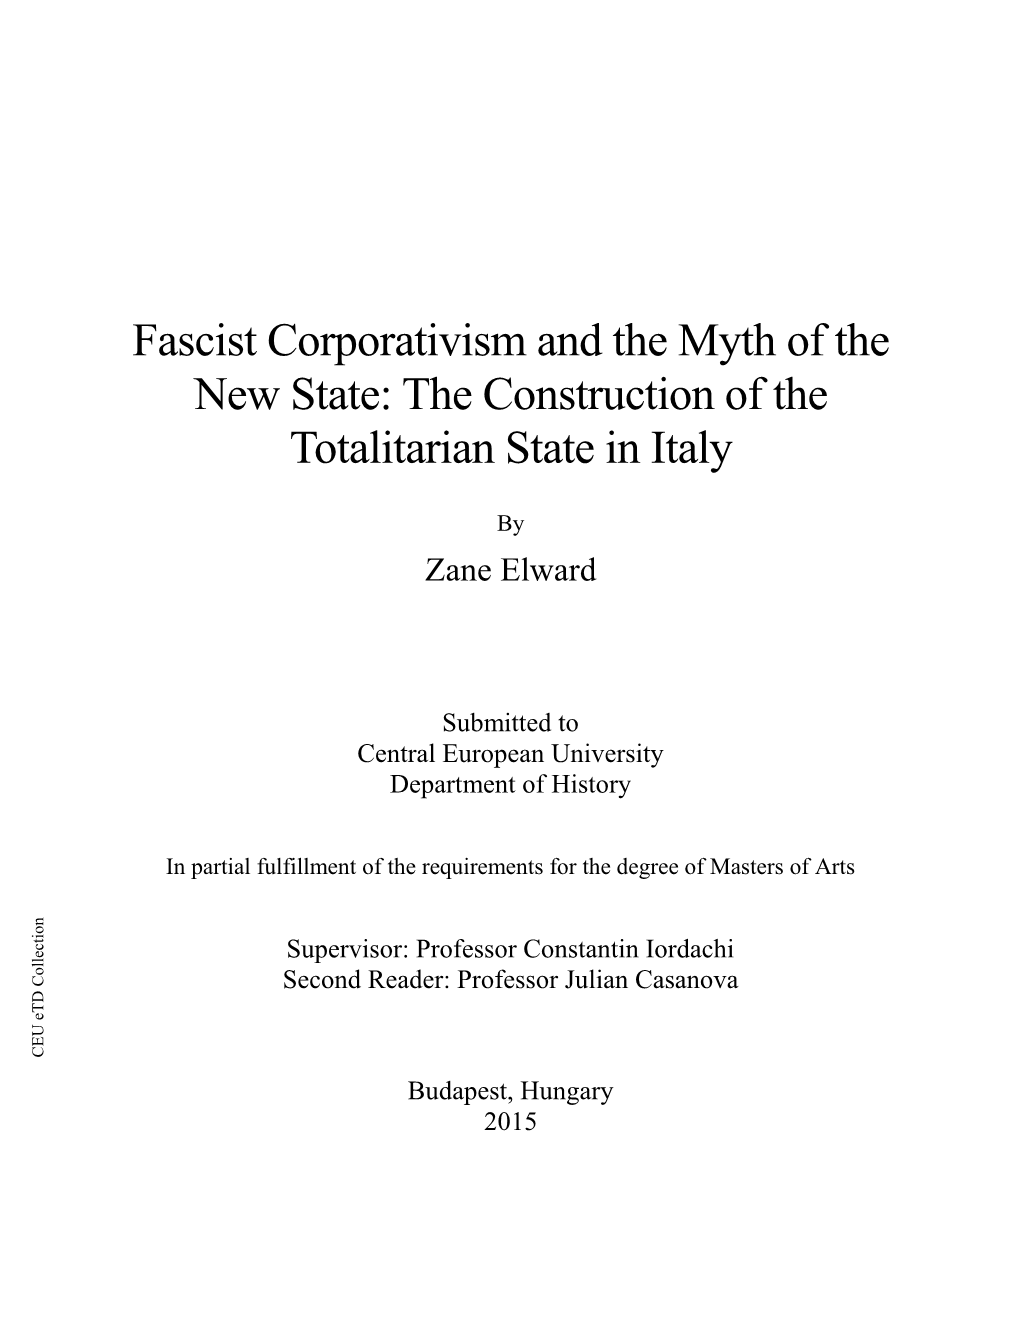 Fascist Corporativism and the Myth of the New State: the Construction of the Totalitarian State in Italy